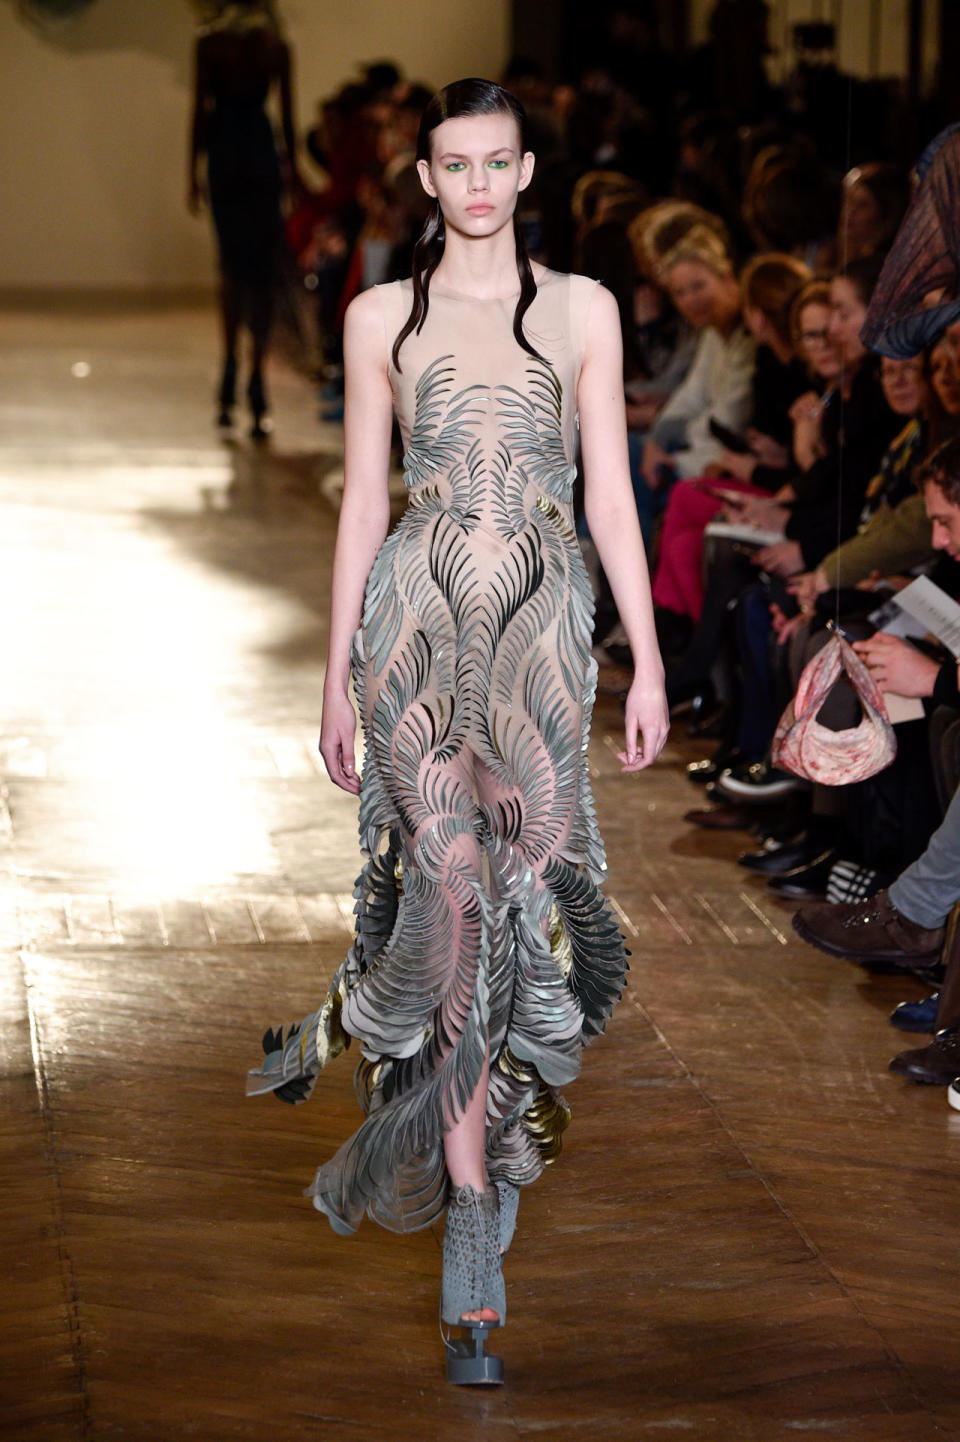 <p>Model wears a semi-sheer dress with silver and gold embellishments from the Iris Van Herpen SS18 Haute Couture show. (Photo: Getty Images) </p>